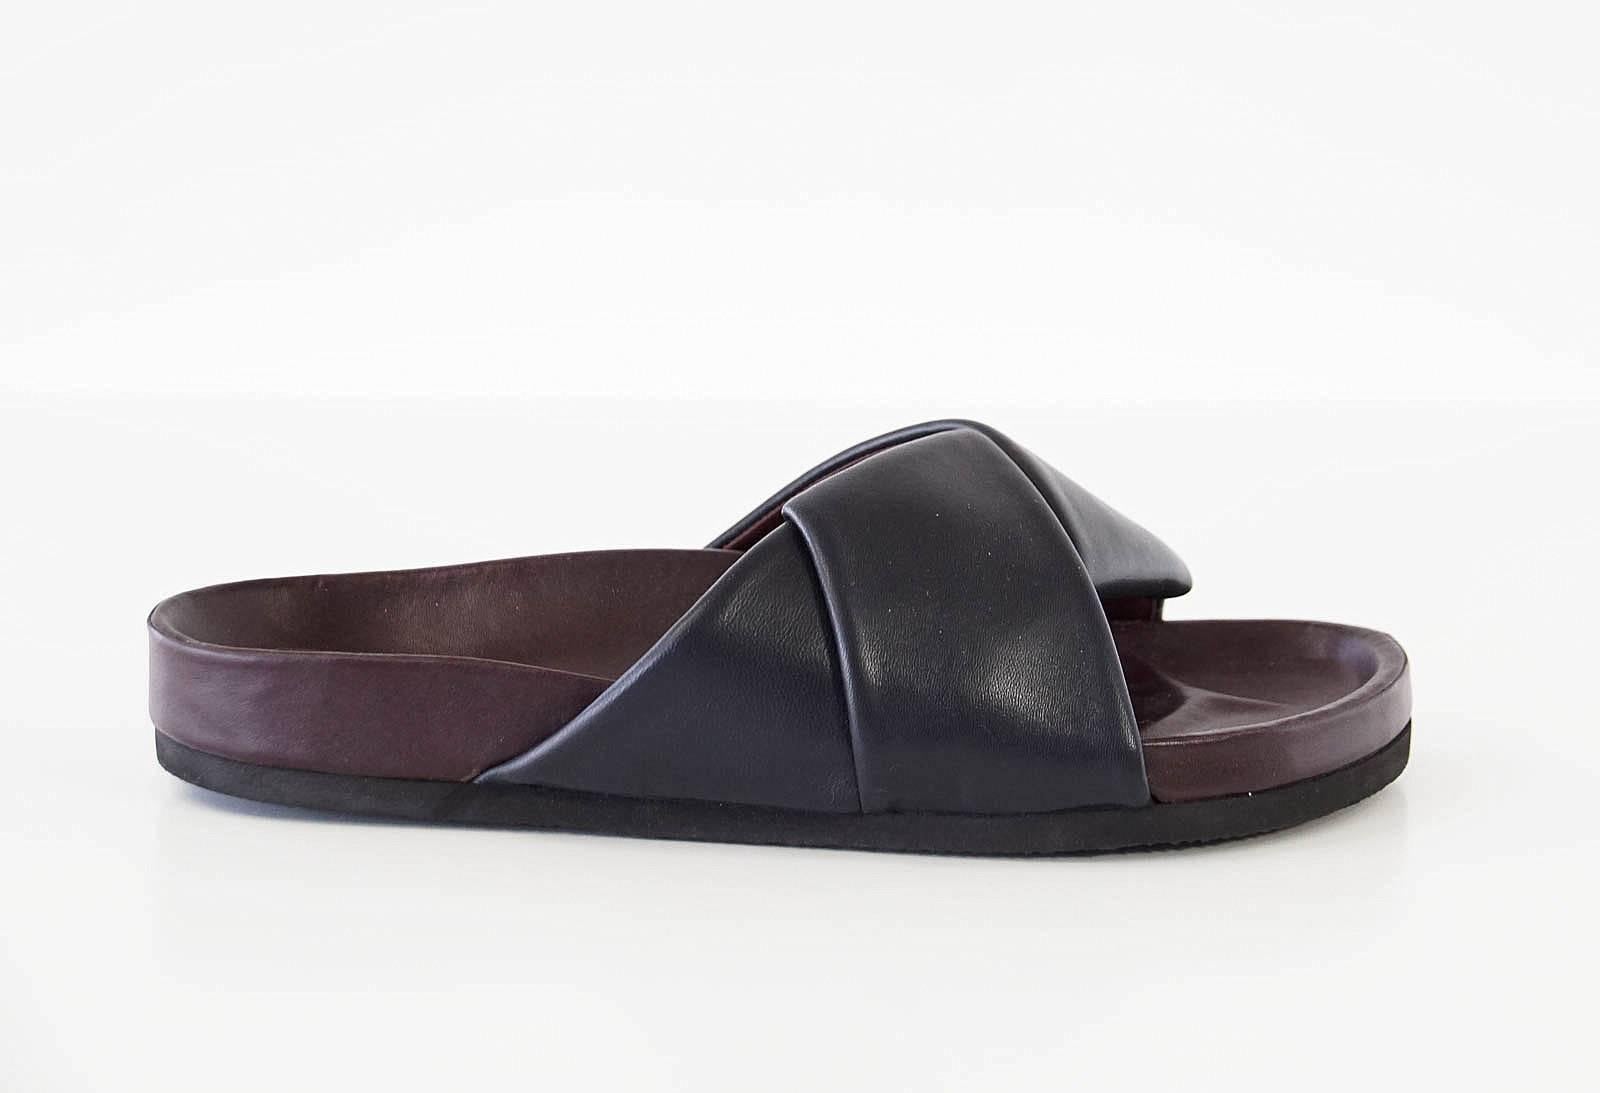 Guaranteed authentic CELINE navy slide sandal with modifed men's wear styling.  The summer IT sandal!
Buttery soft navy blue leather set atop cordovan shaped 'birkenstock'
SO comfortable!
**Runs big - fits 9**.

SIZE 38 
USA SIZE 8

SHOE